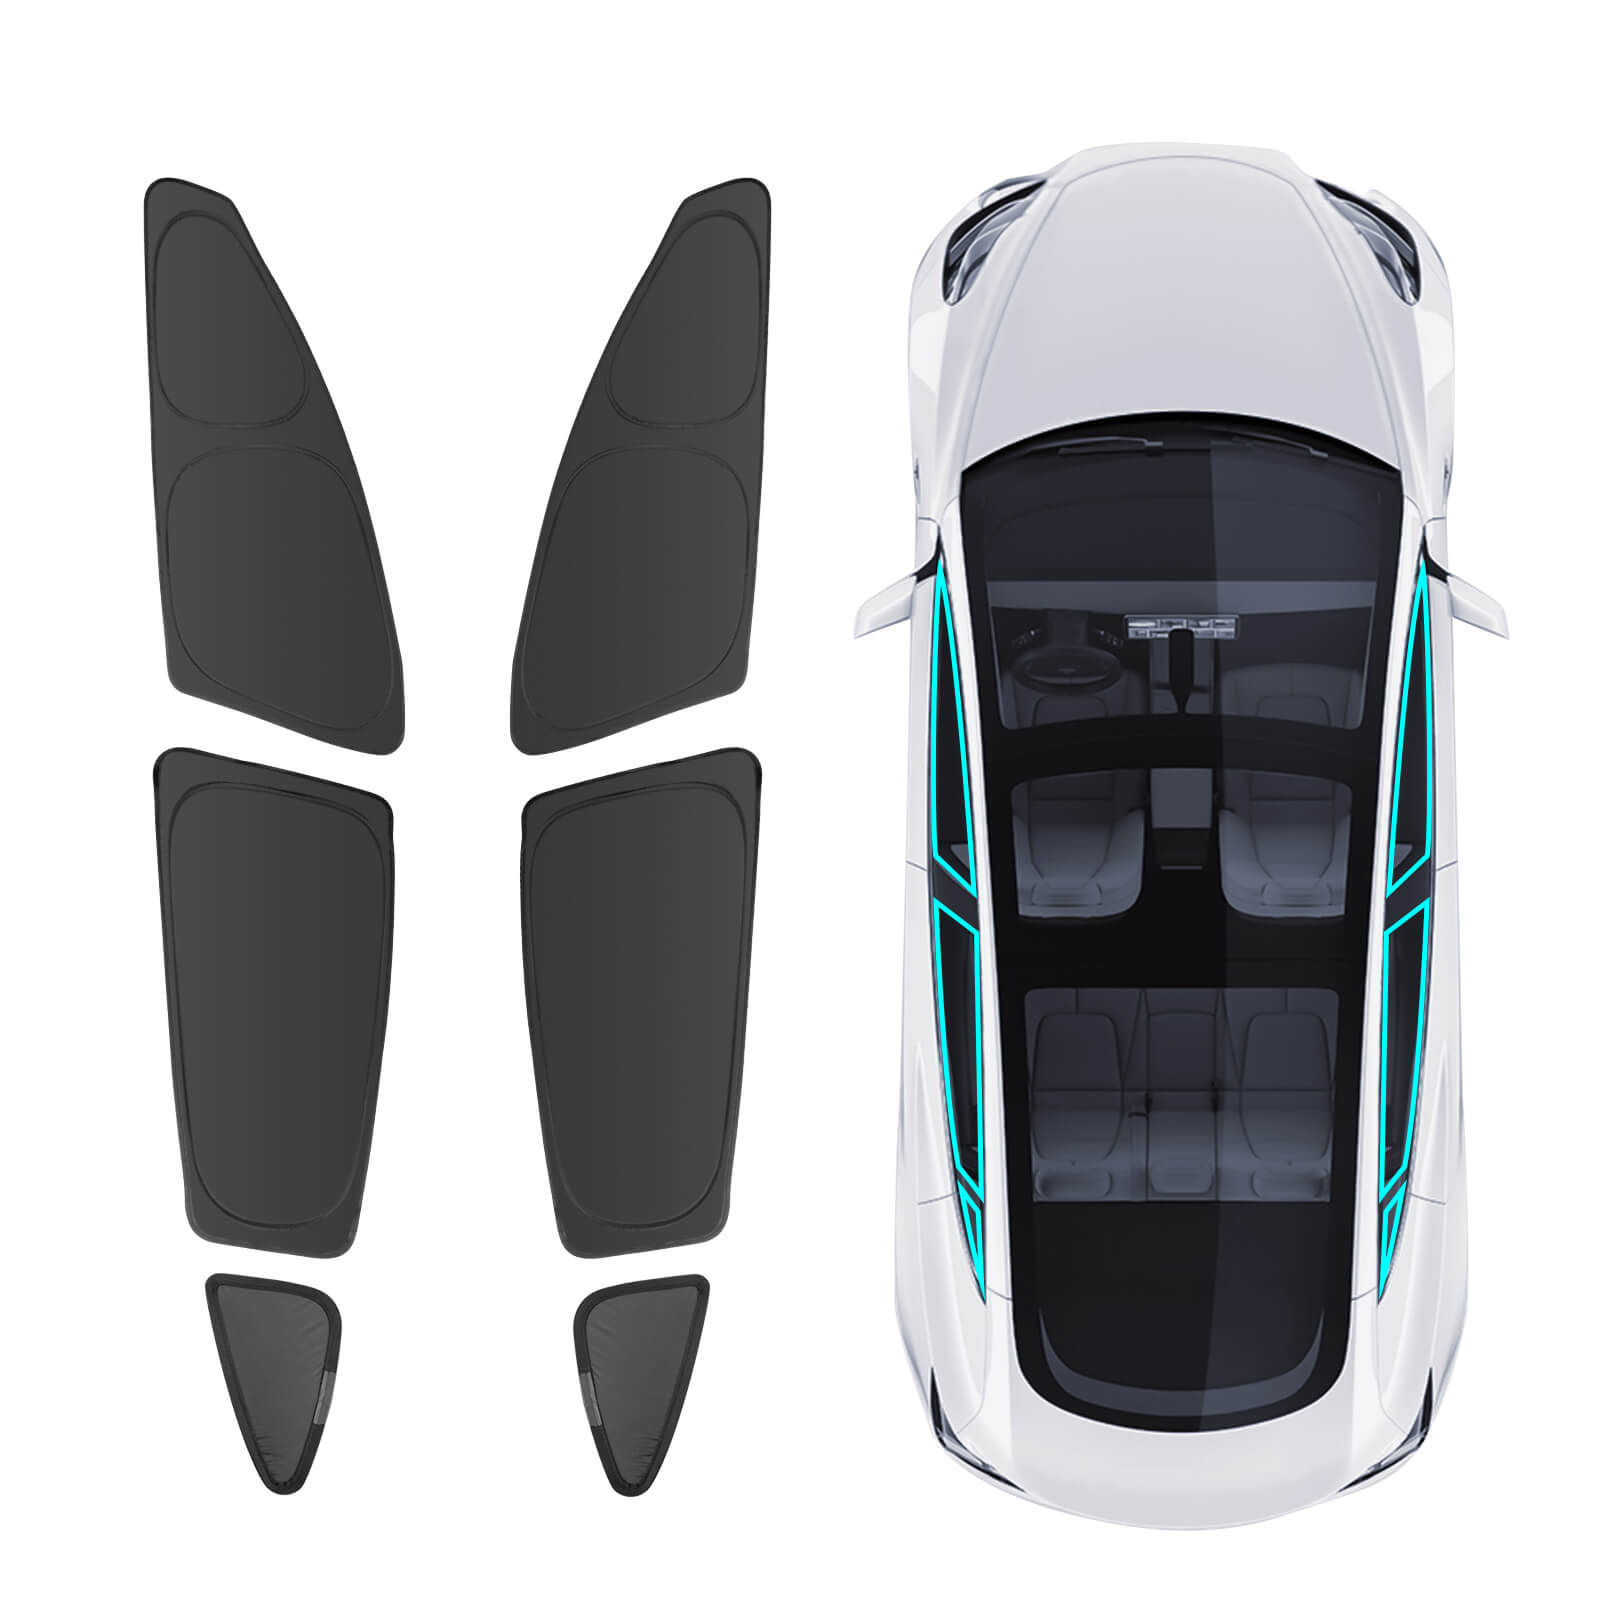 for Tesla Model 3 Side Window Sunshade - 6 Pieces Camping Privacy Shade  Set, Upgraded 4 Layers UV Blocker Car Window Sun Shade for Model 3  Accessories